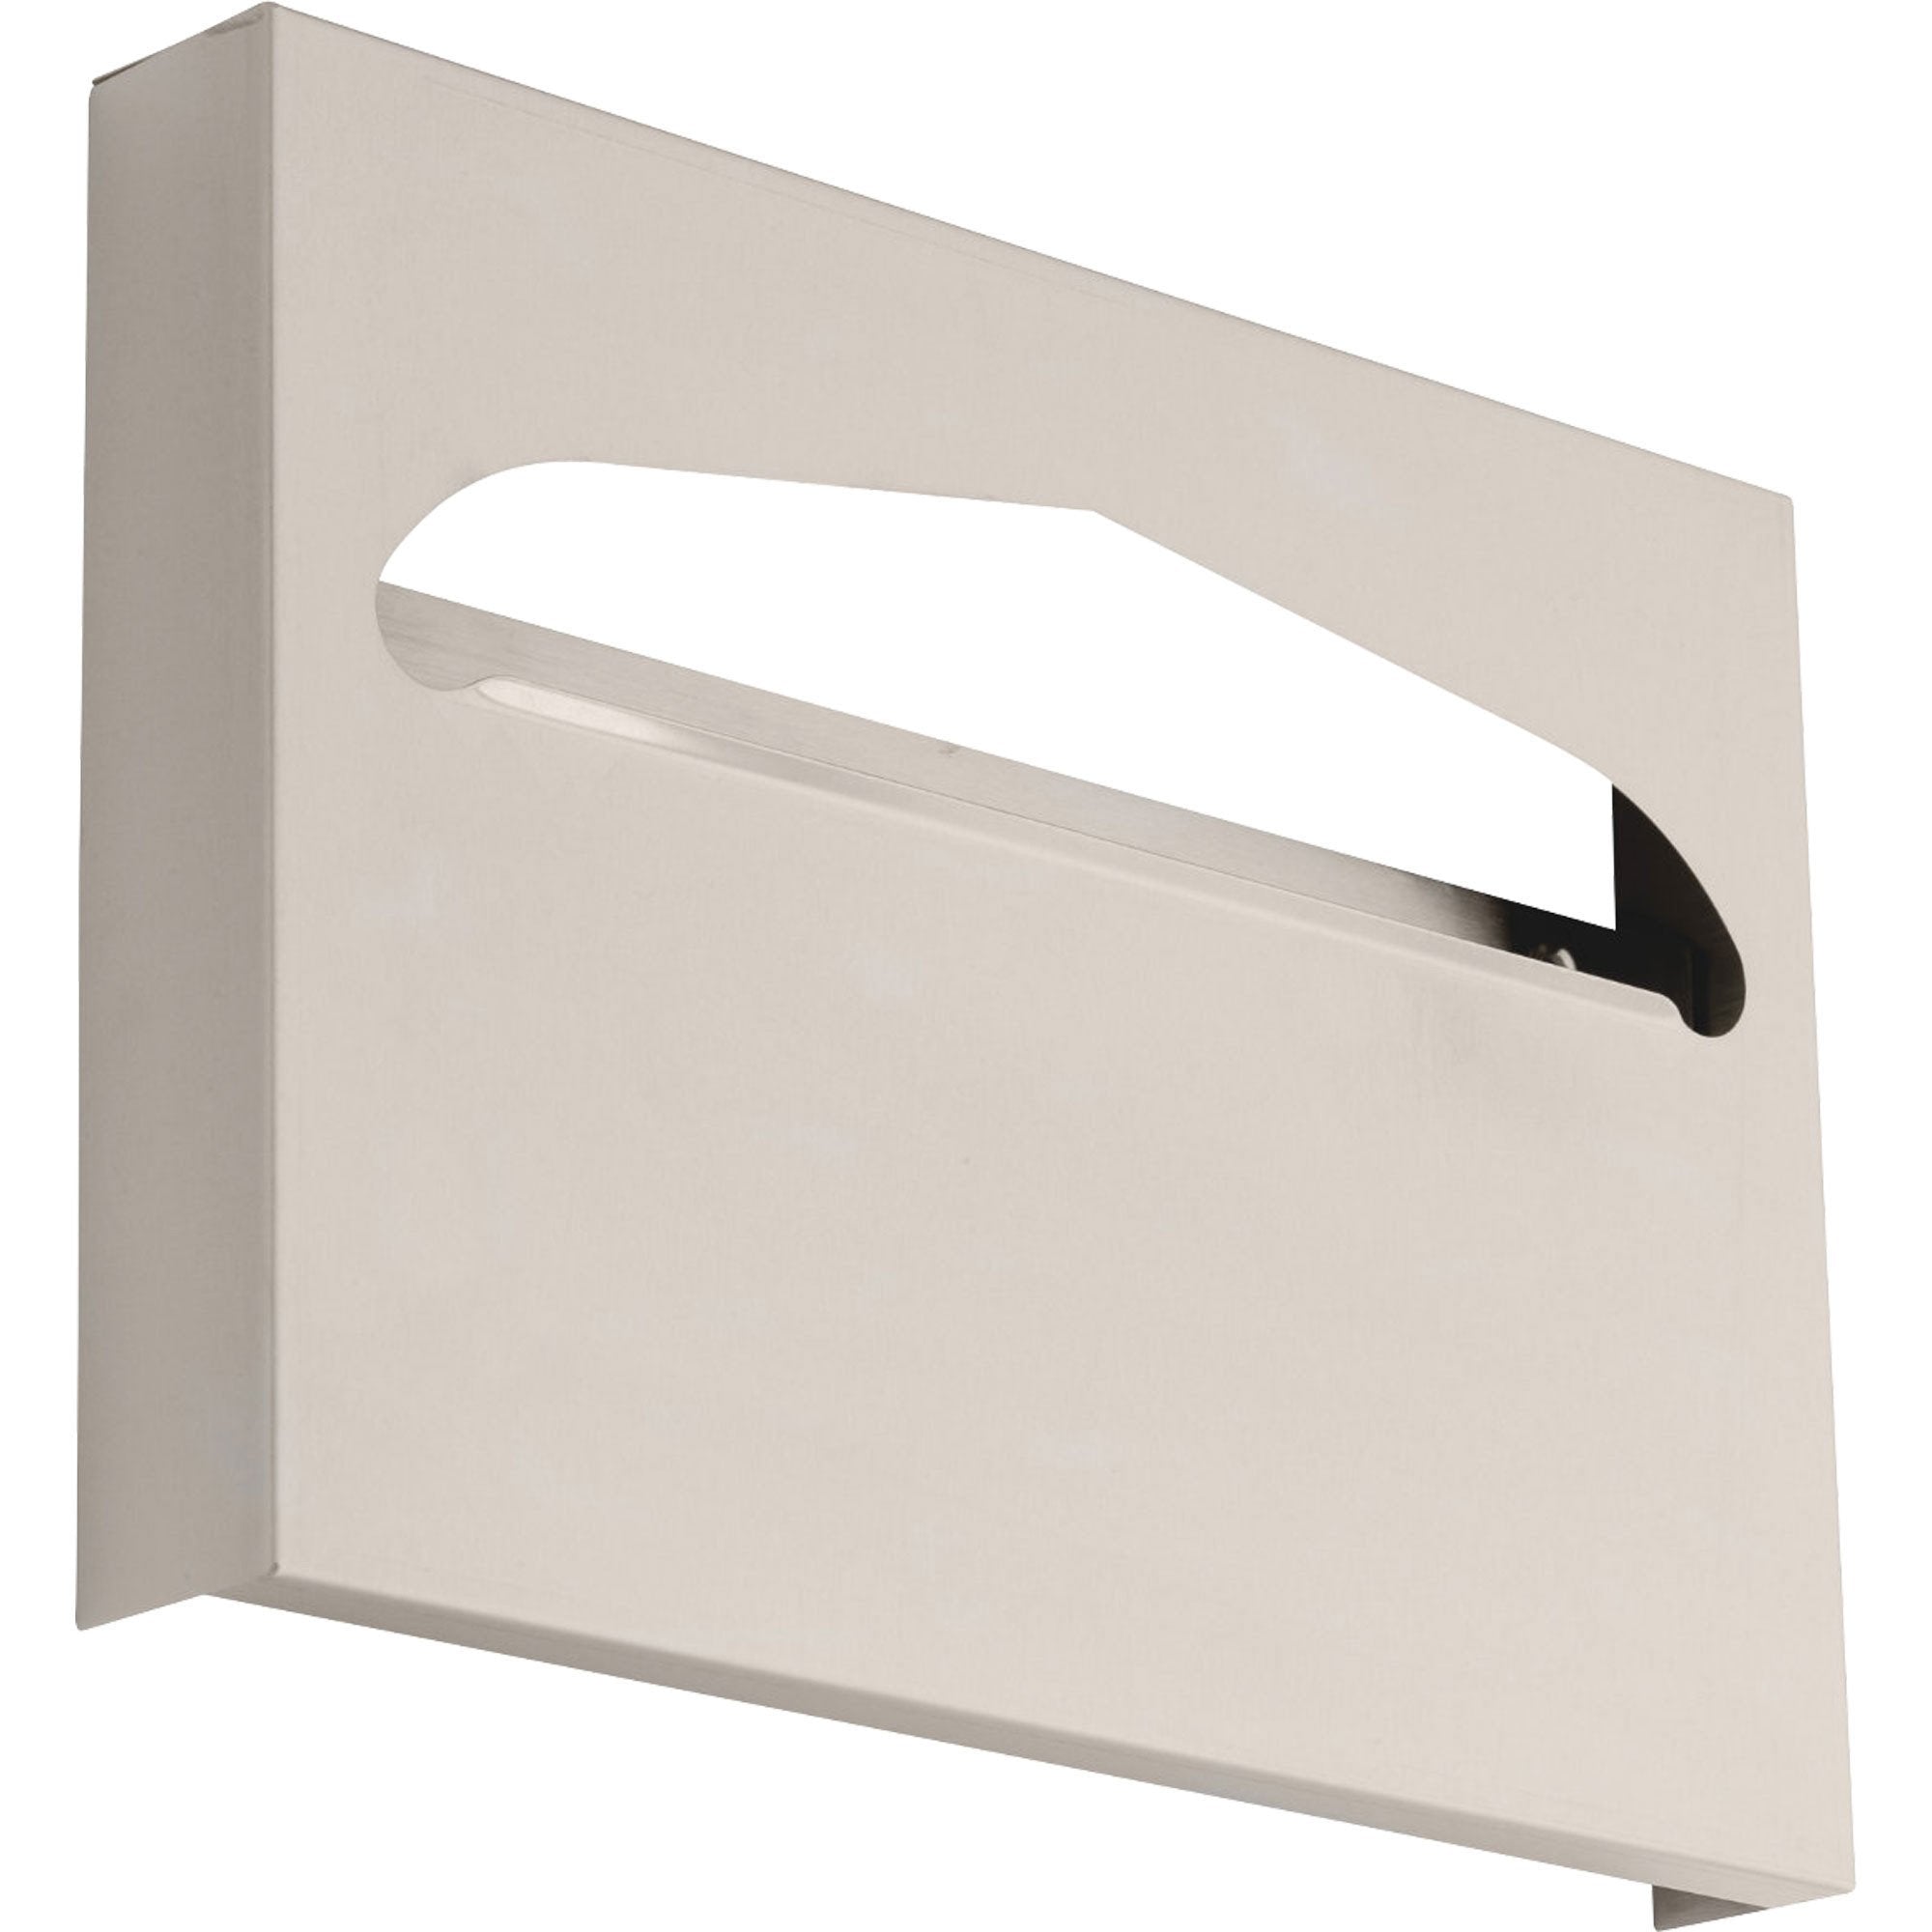 Delta Toilet Seat Cover Cabinet in Satin Stainless Steel Finish 572970